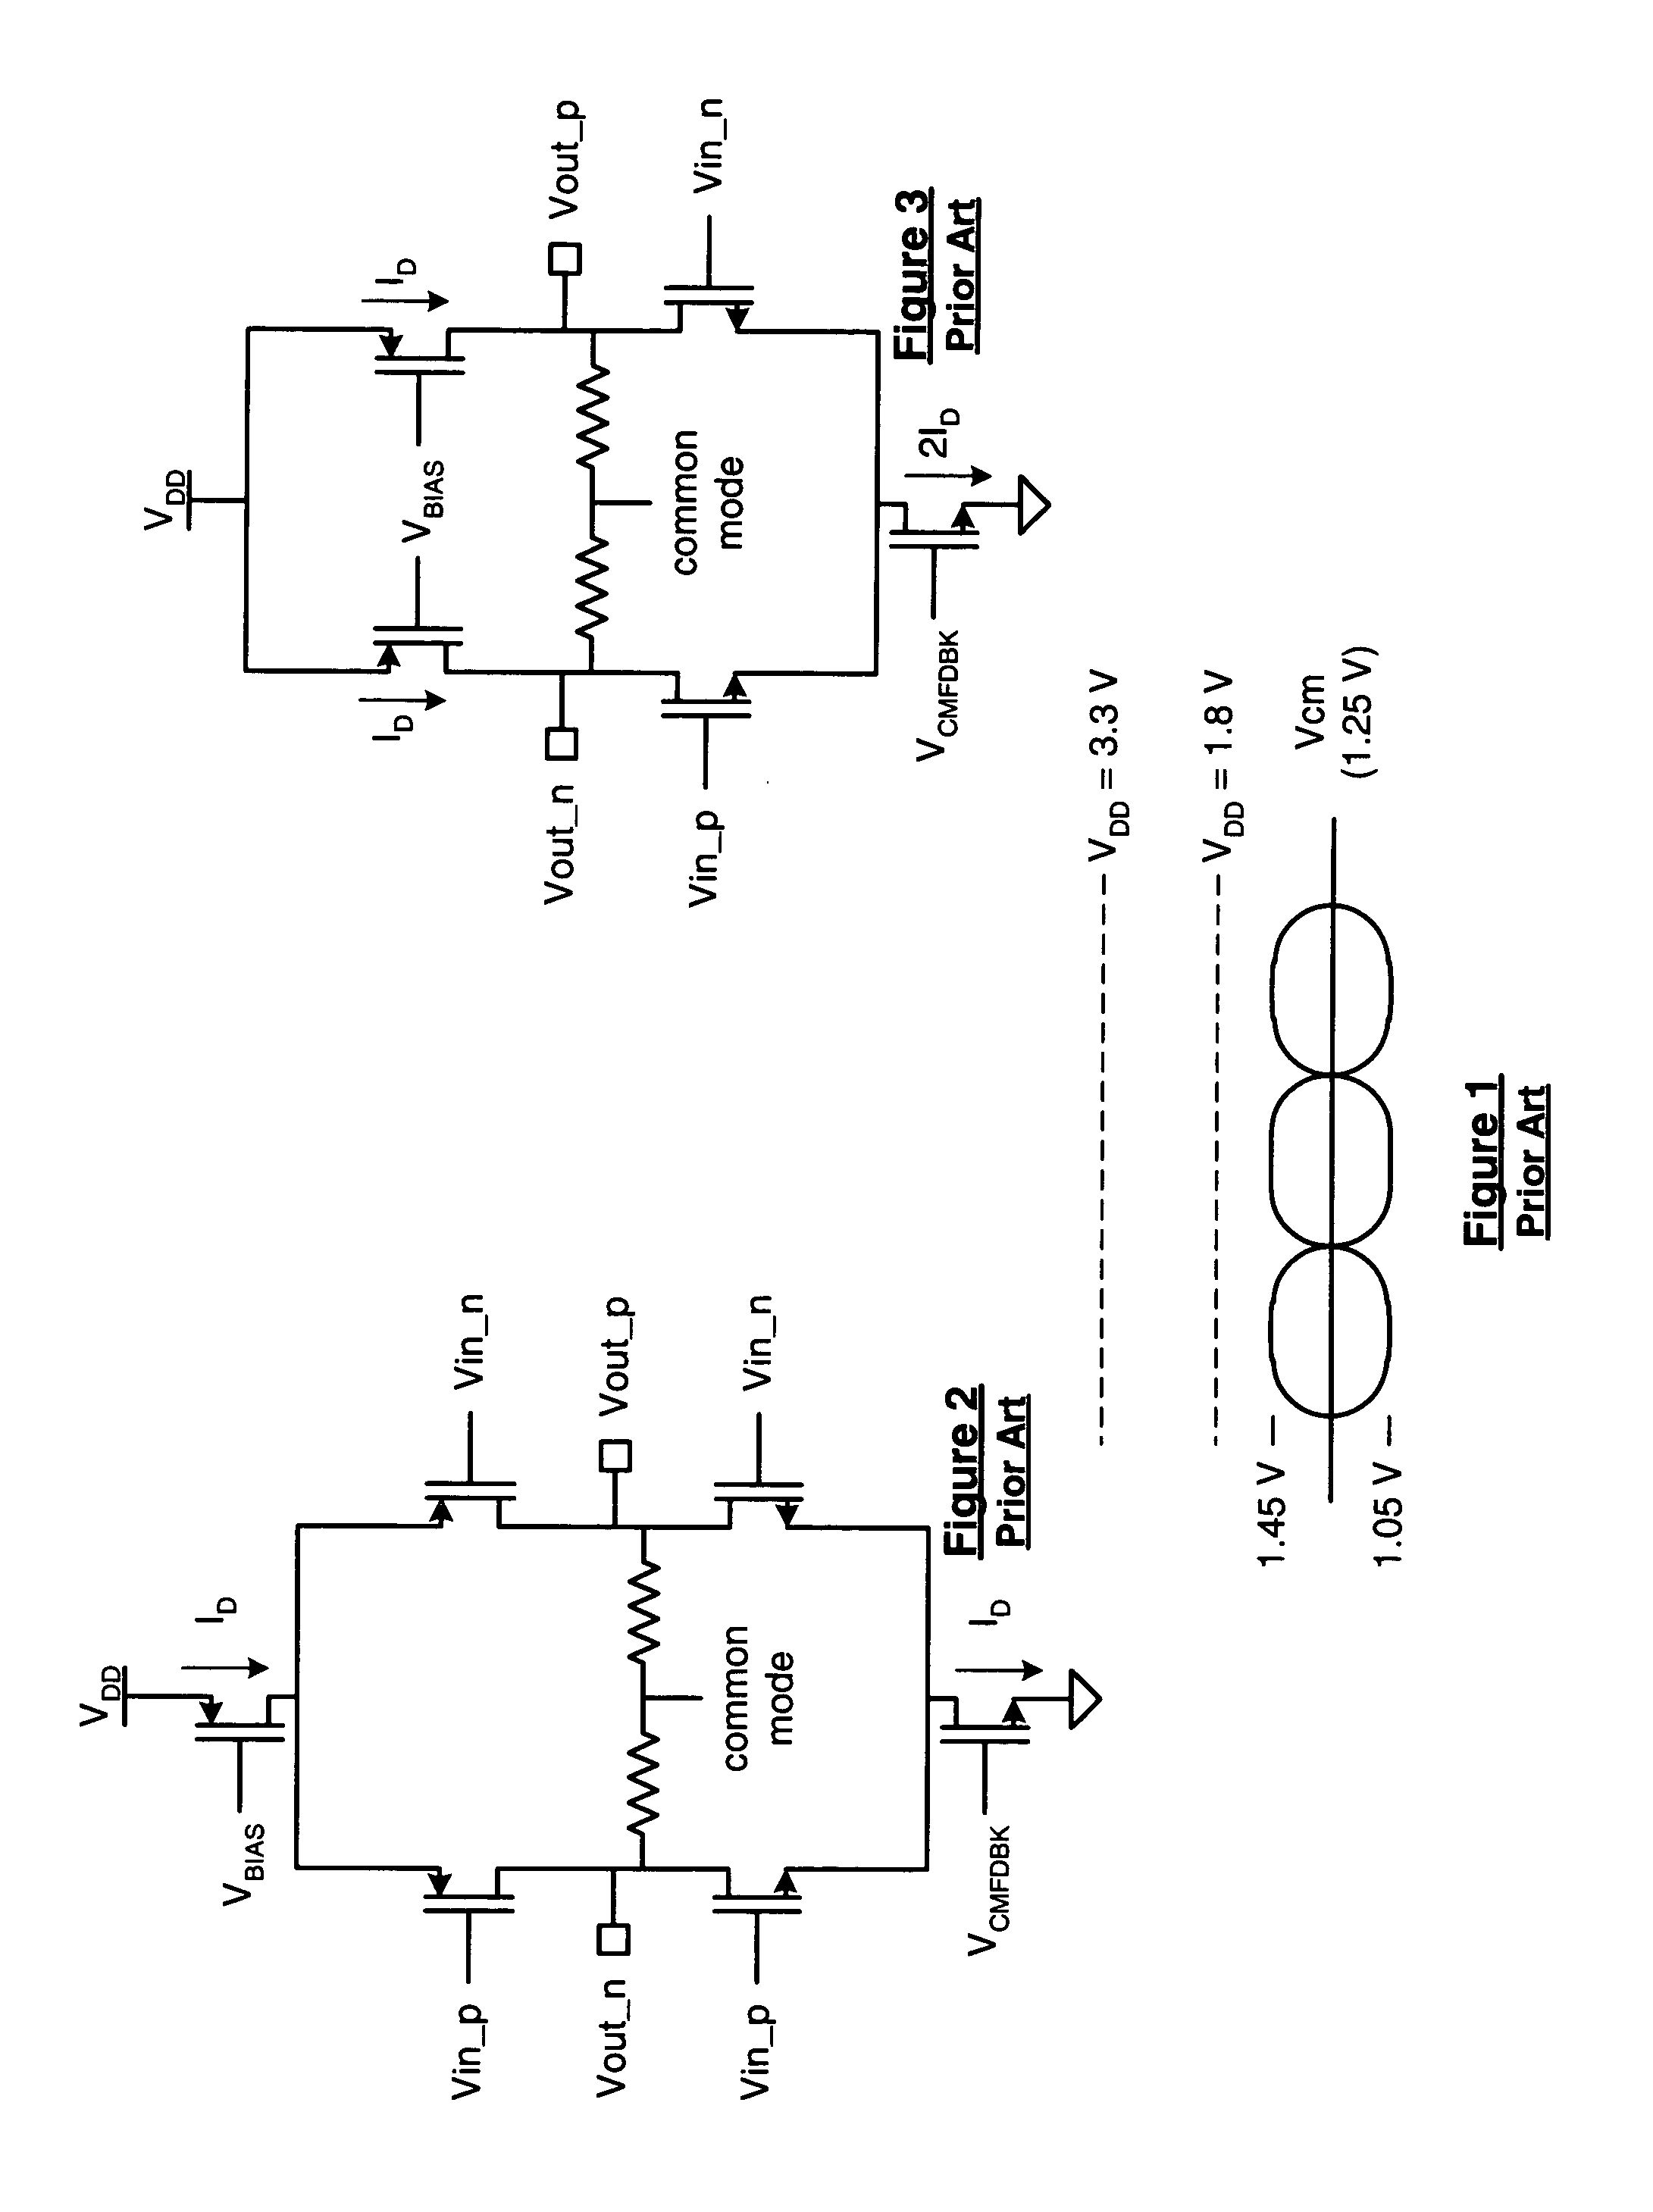 Low power low voltage differential signaling driver